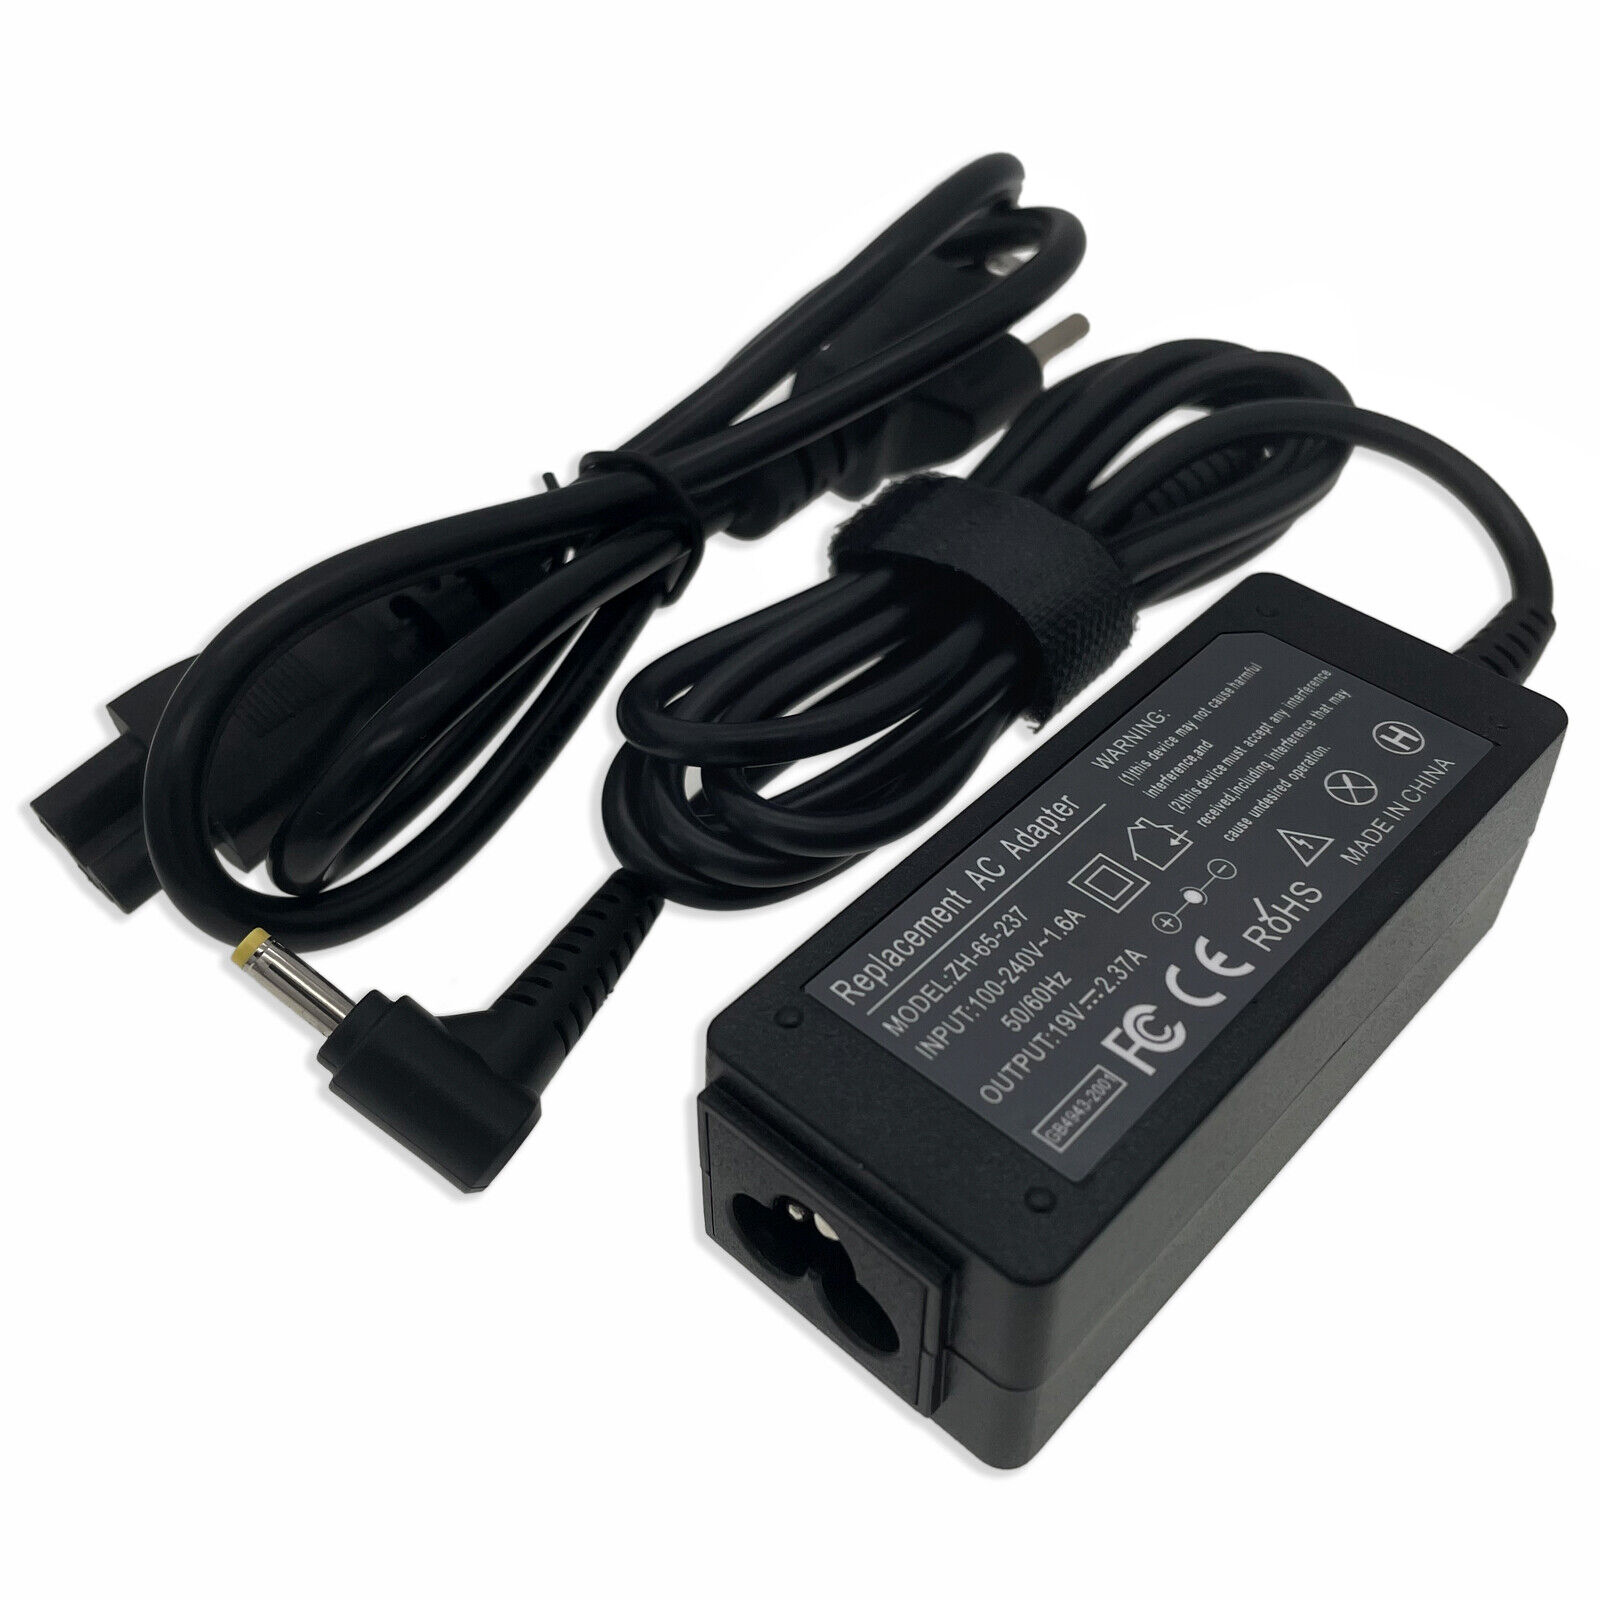 AC Adapter Charger For Toshiba Satellite P25W-C2304-4K P25W-C2302 P25W-C2300-4K